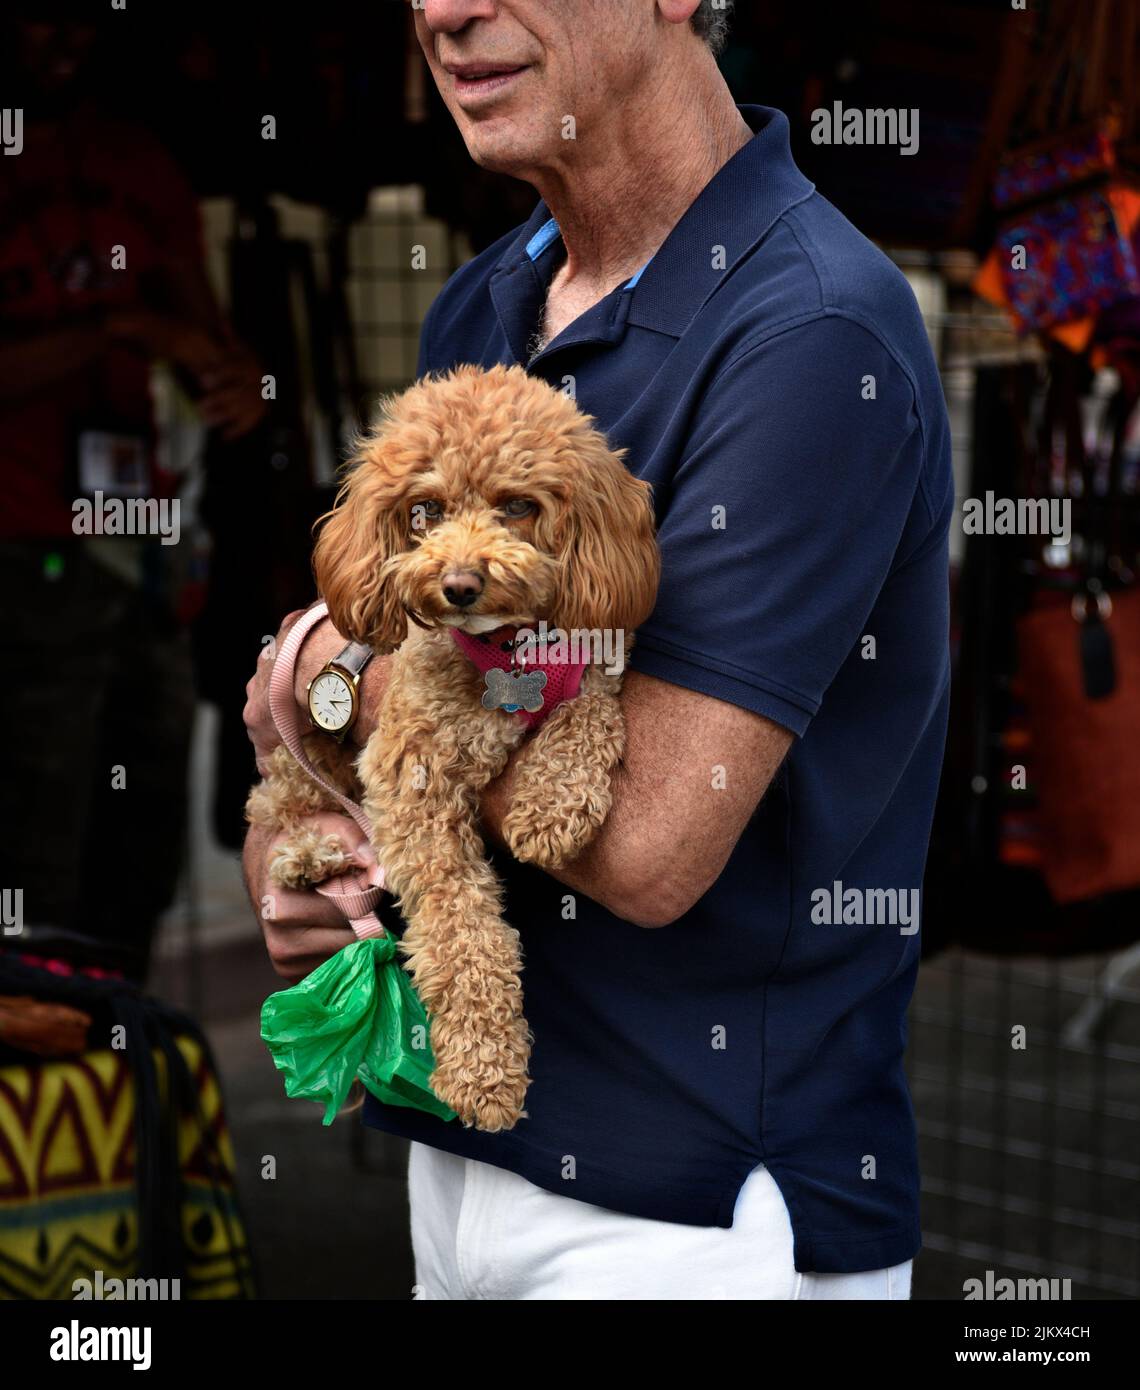 A man holds his pet dog as they enjoy an outdoor arts festival in Santa Fe, New Mexico. Stock Photo